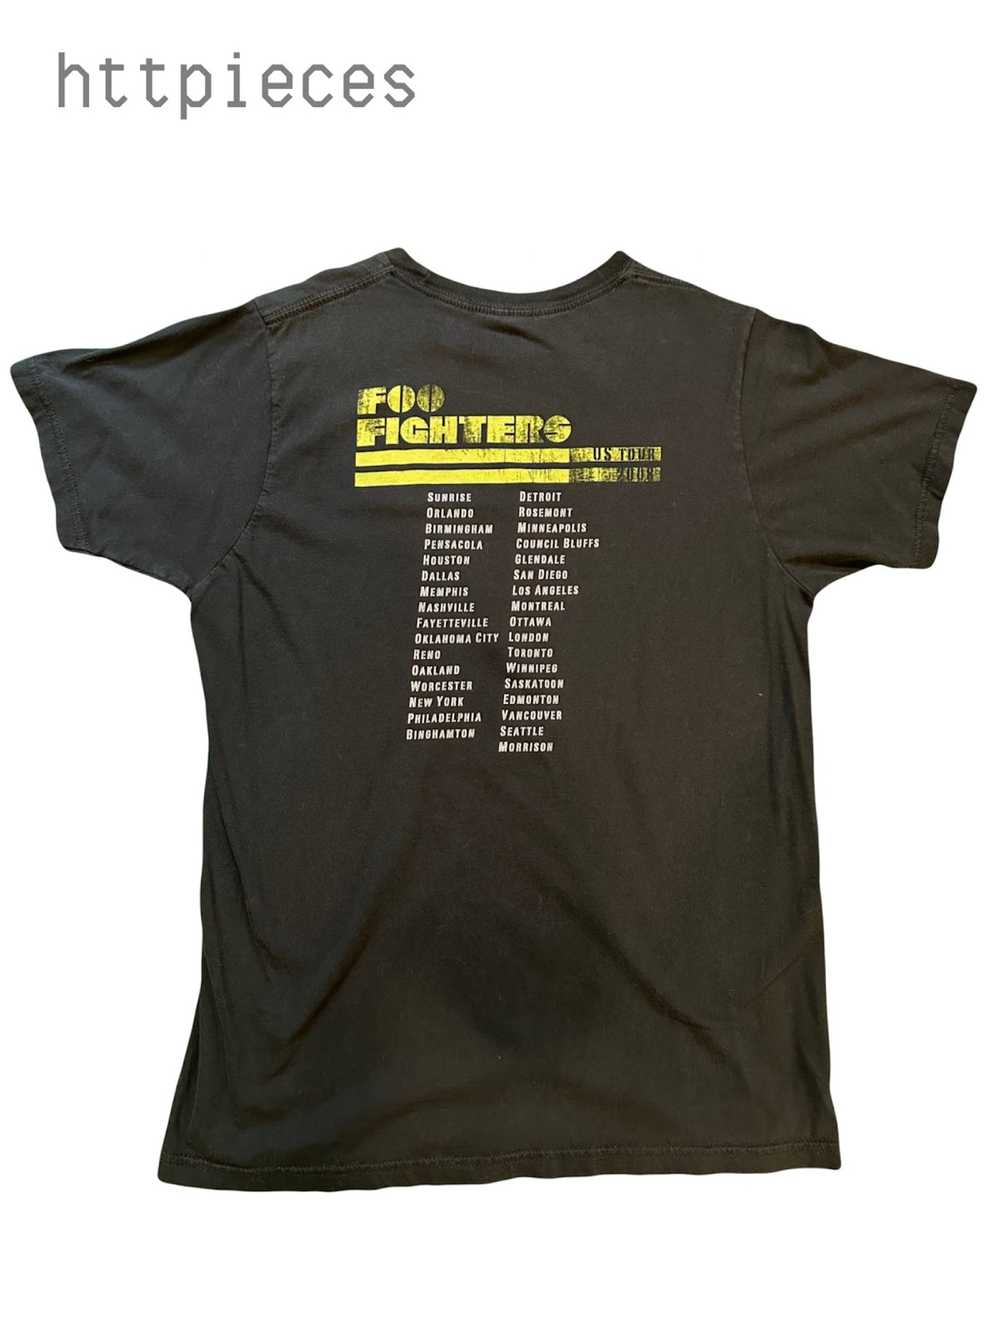 Band Tees 2008 Foo Fighters Tour t - image 2